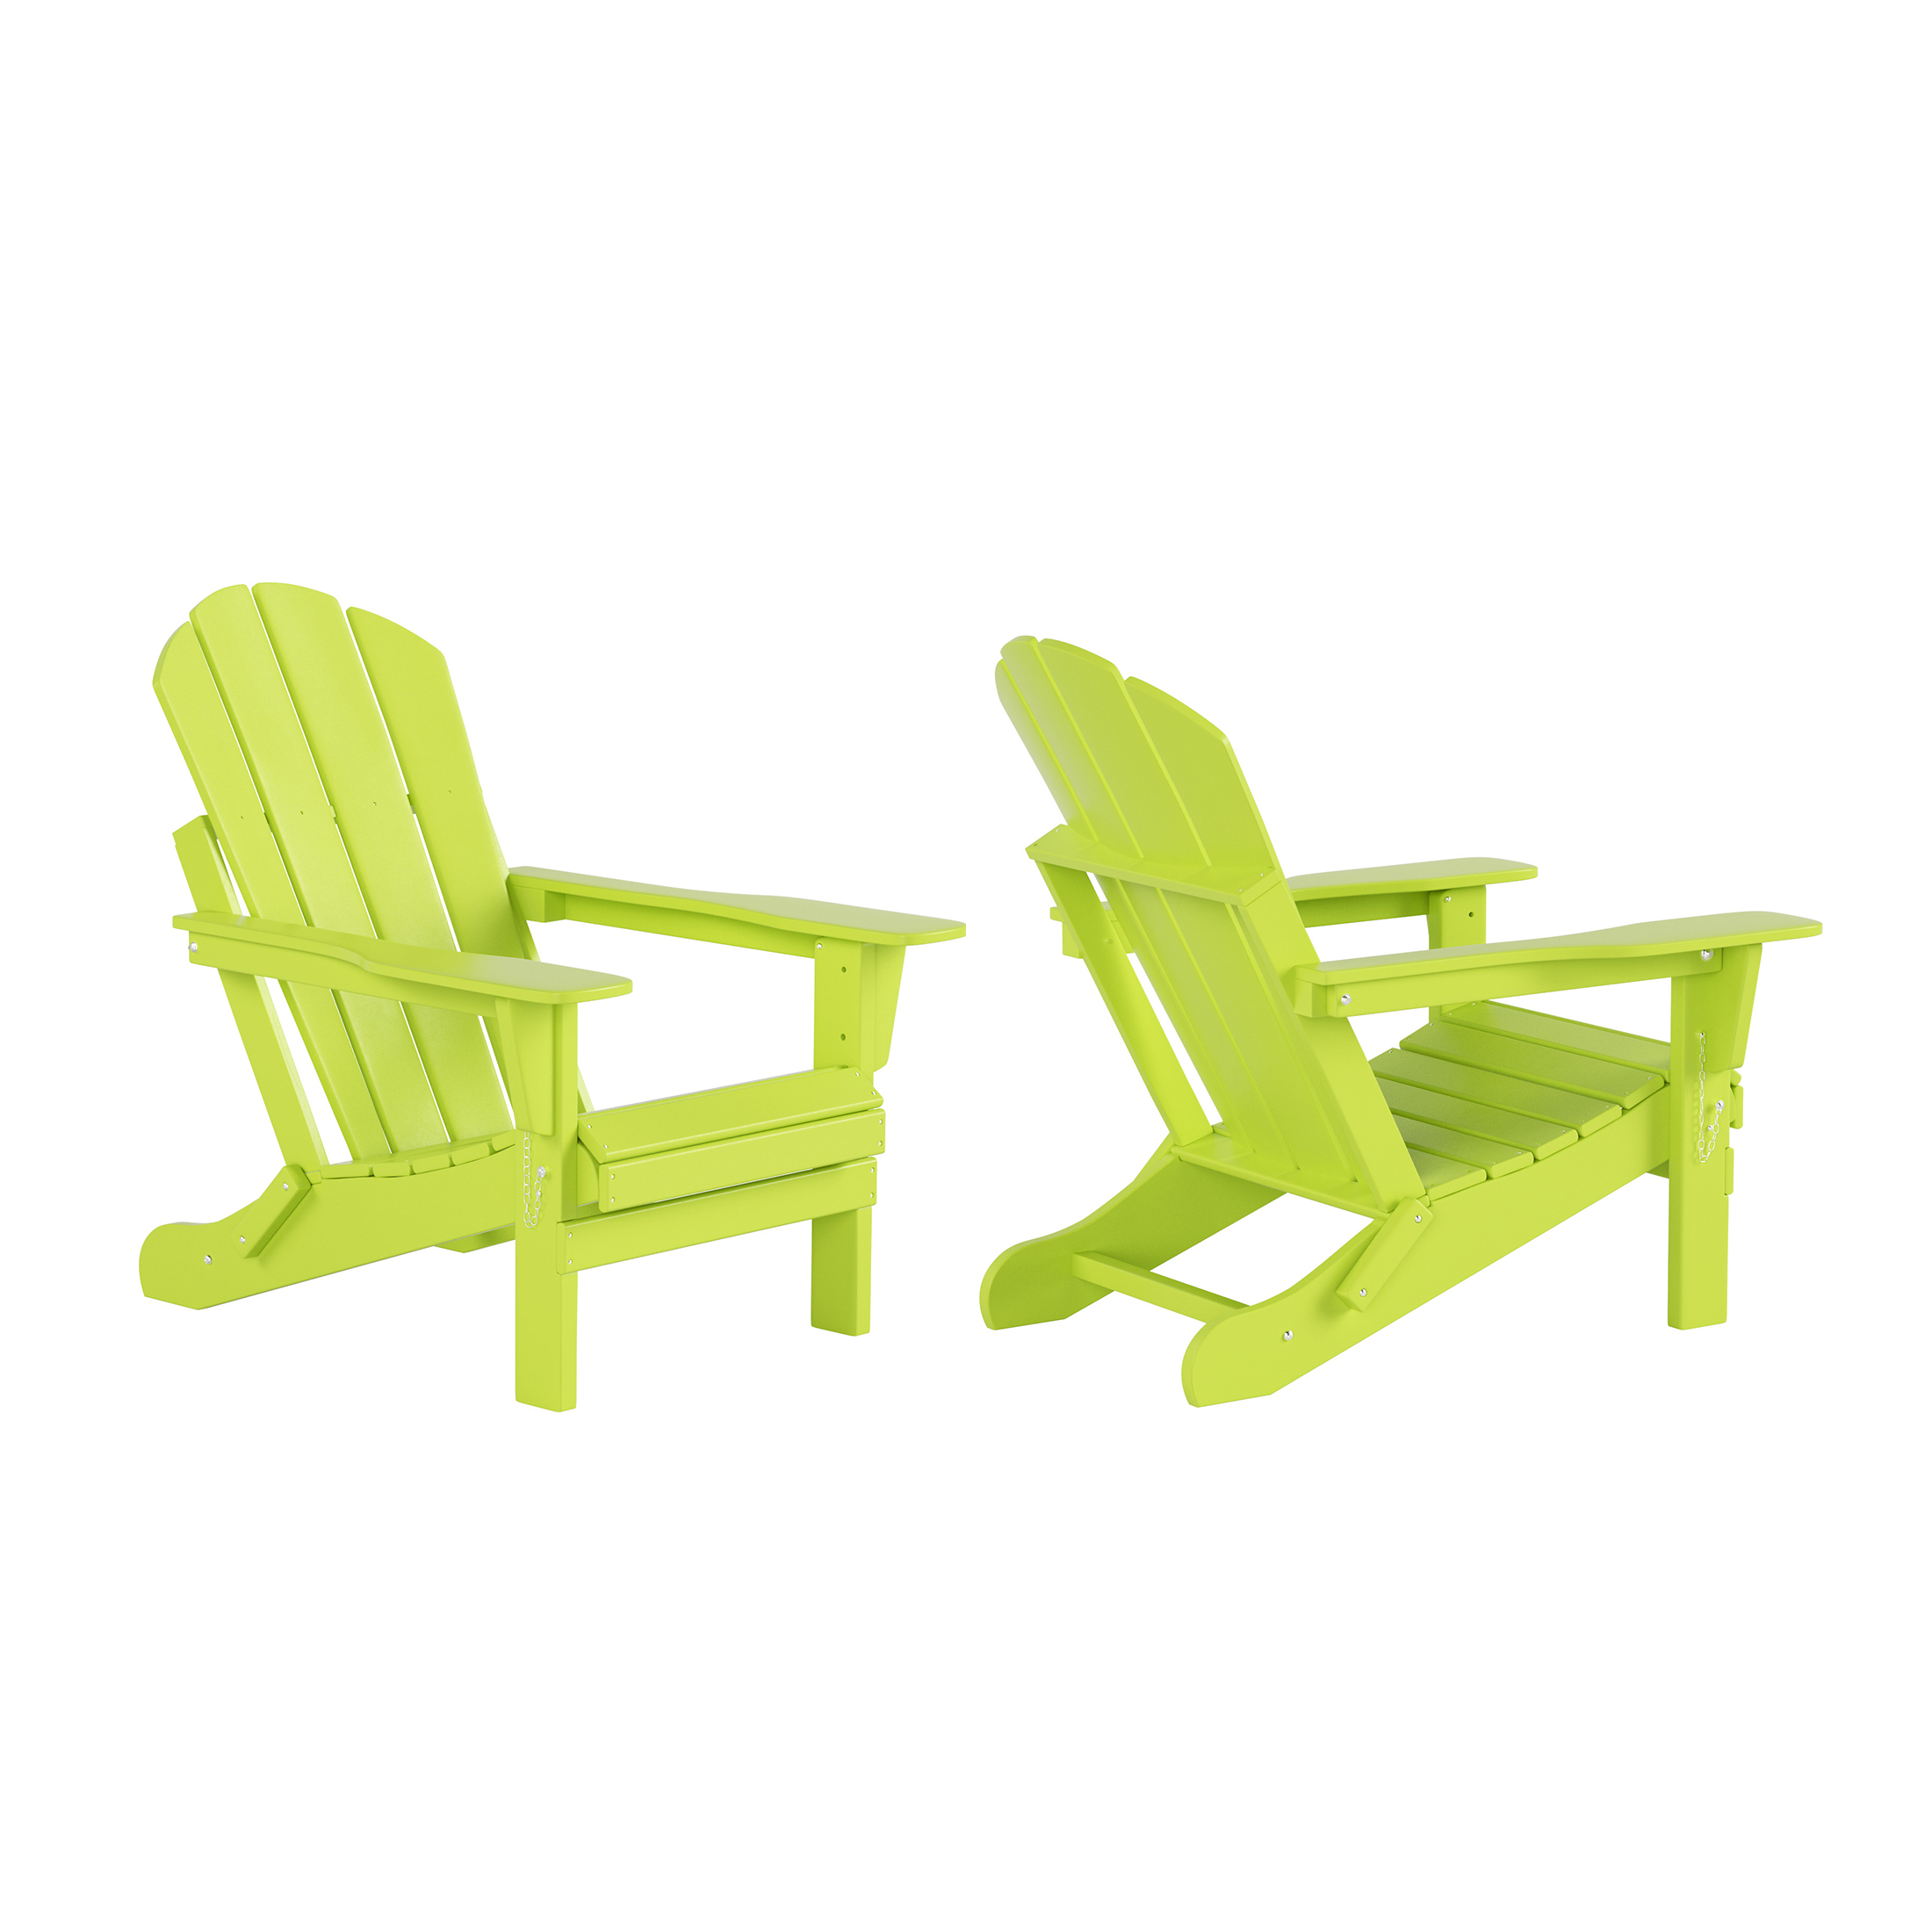 WestinTrends Malibu 3-Pieces Outdoor Patio Furniture Set, All Weather Outdoor Seating Plastic Adirondack Chair Set of 2 with Coffee Table for Porch Lawn Backyard, Lime - image 4 of 7